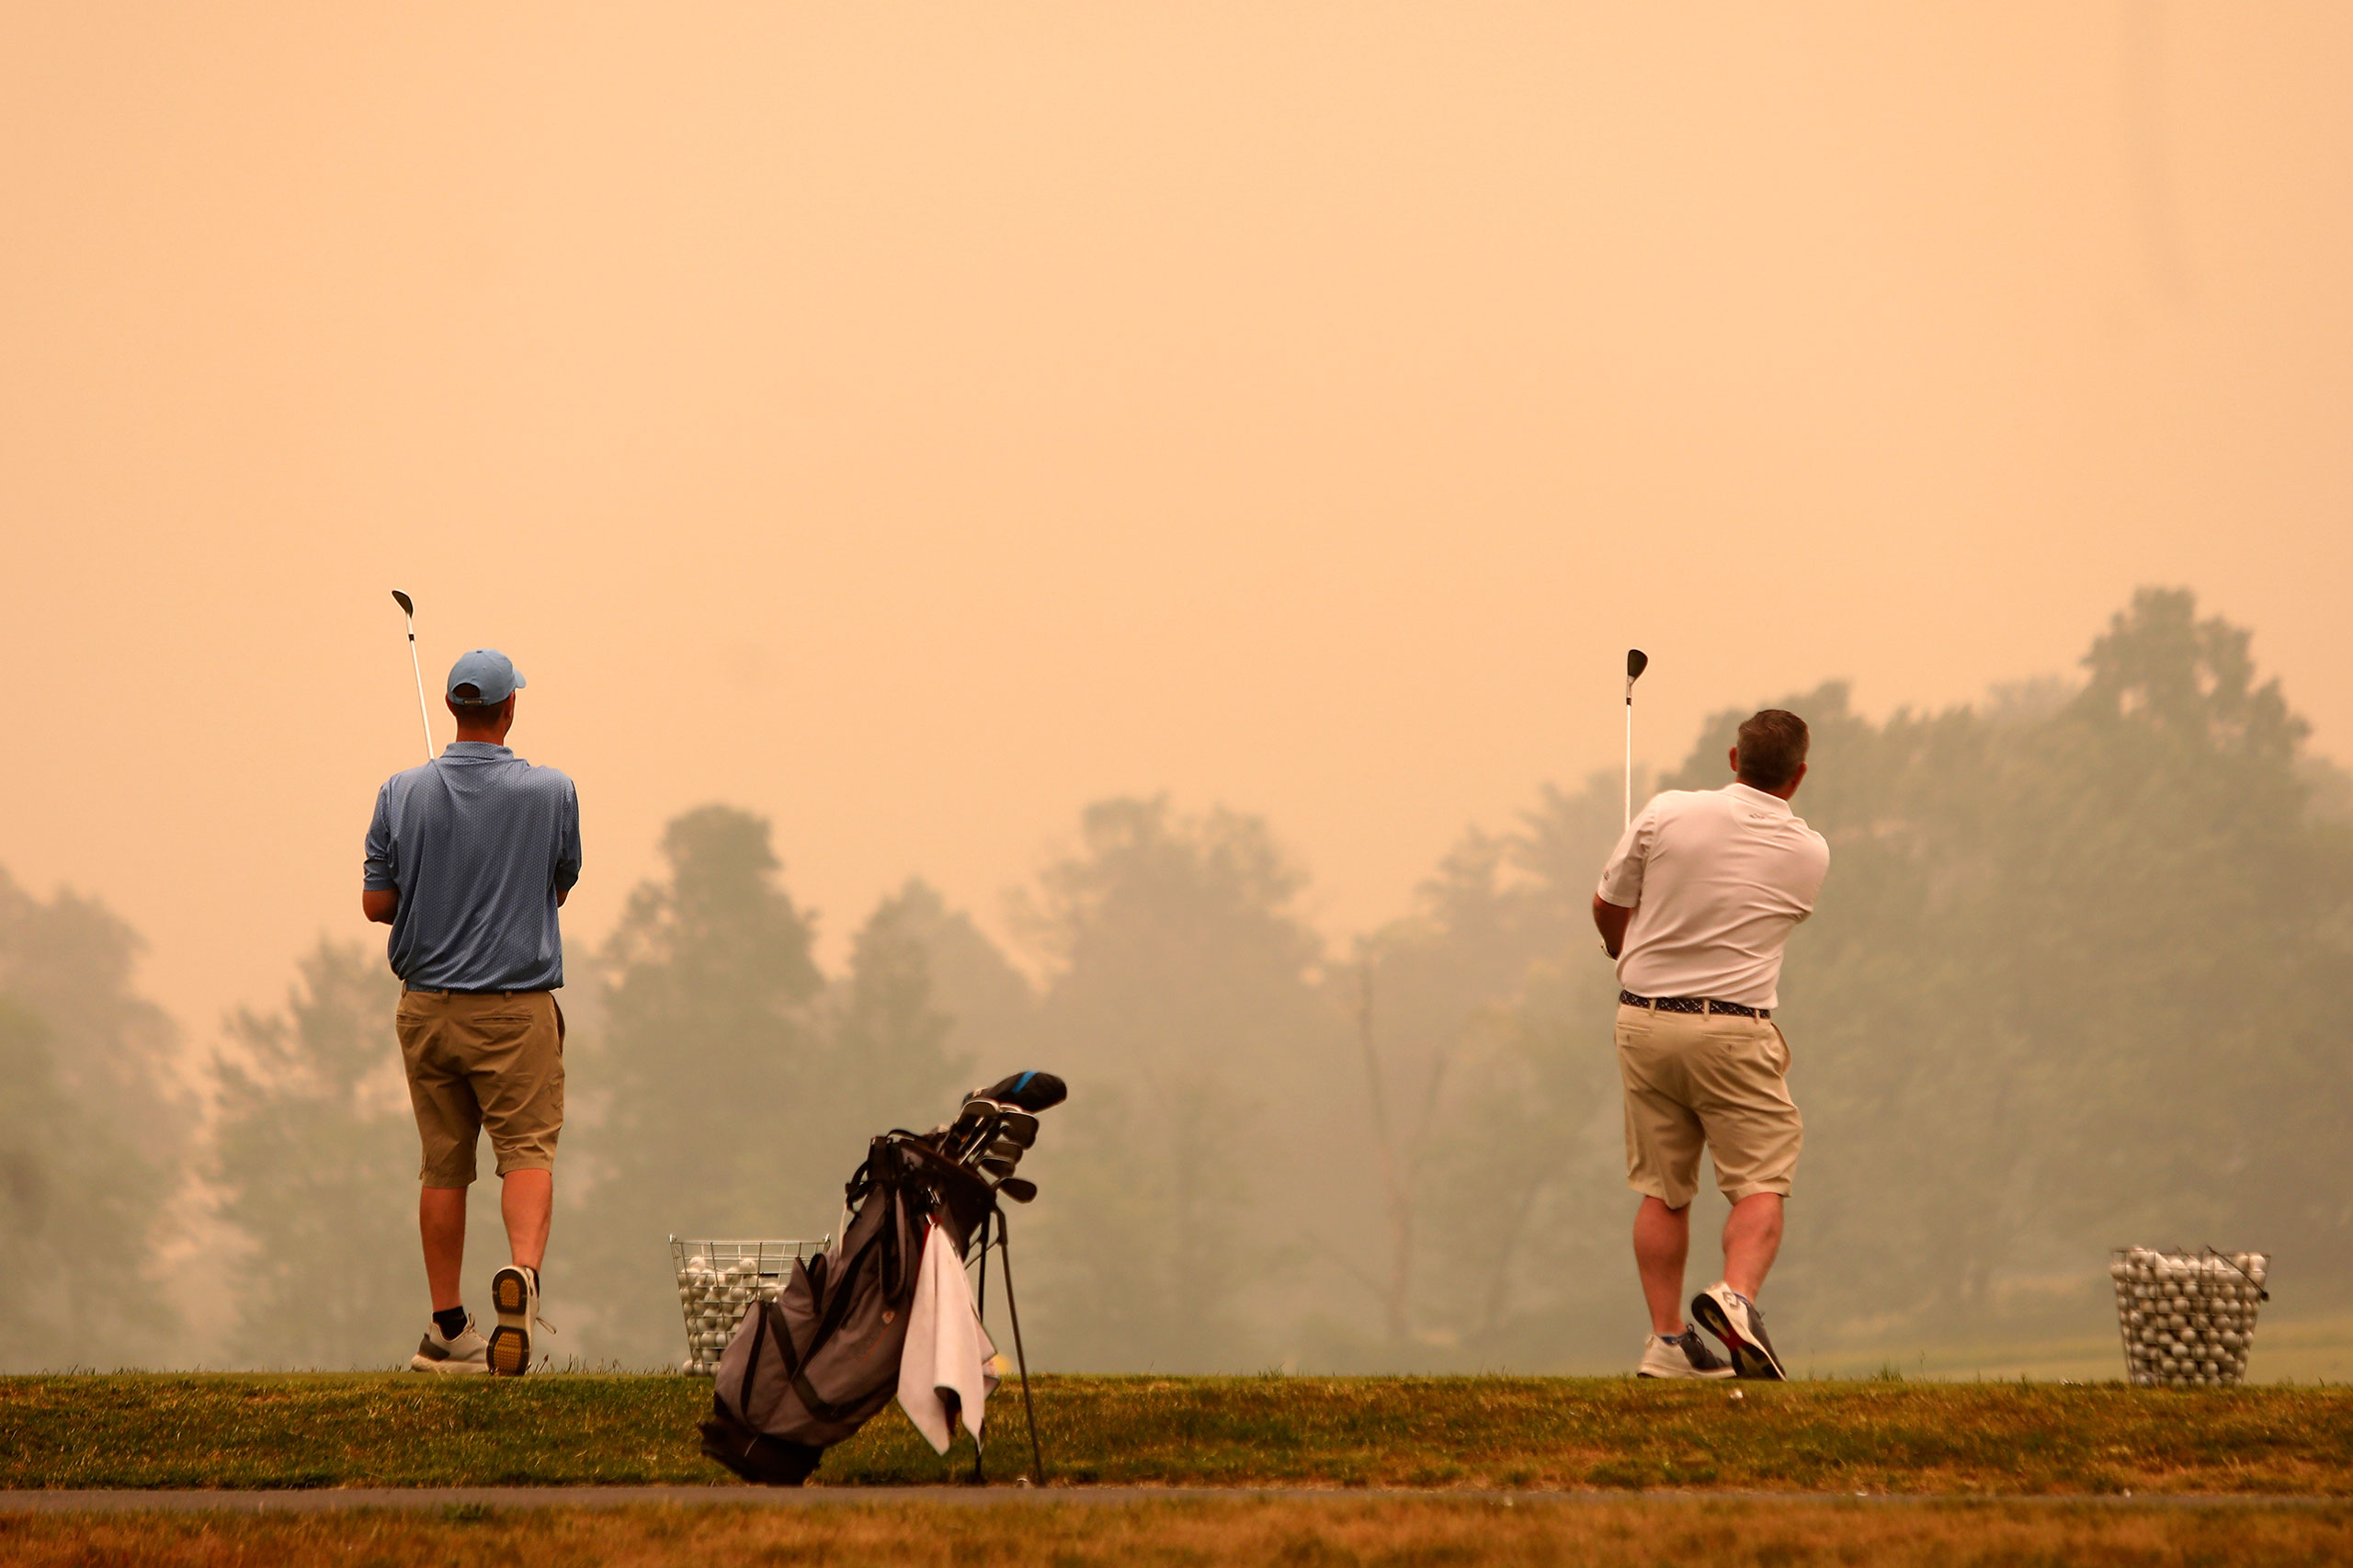 Golfers watch their shots at the driving range at Valley Country Club in Sugarloaf, Pa., as smoke from wildfires in Canada fill the air, on June 7, 2023. (John Haeger—Standard-Speaker/AP)